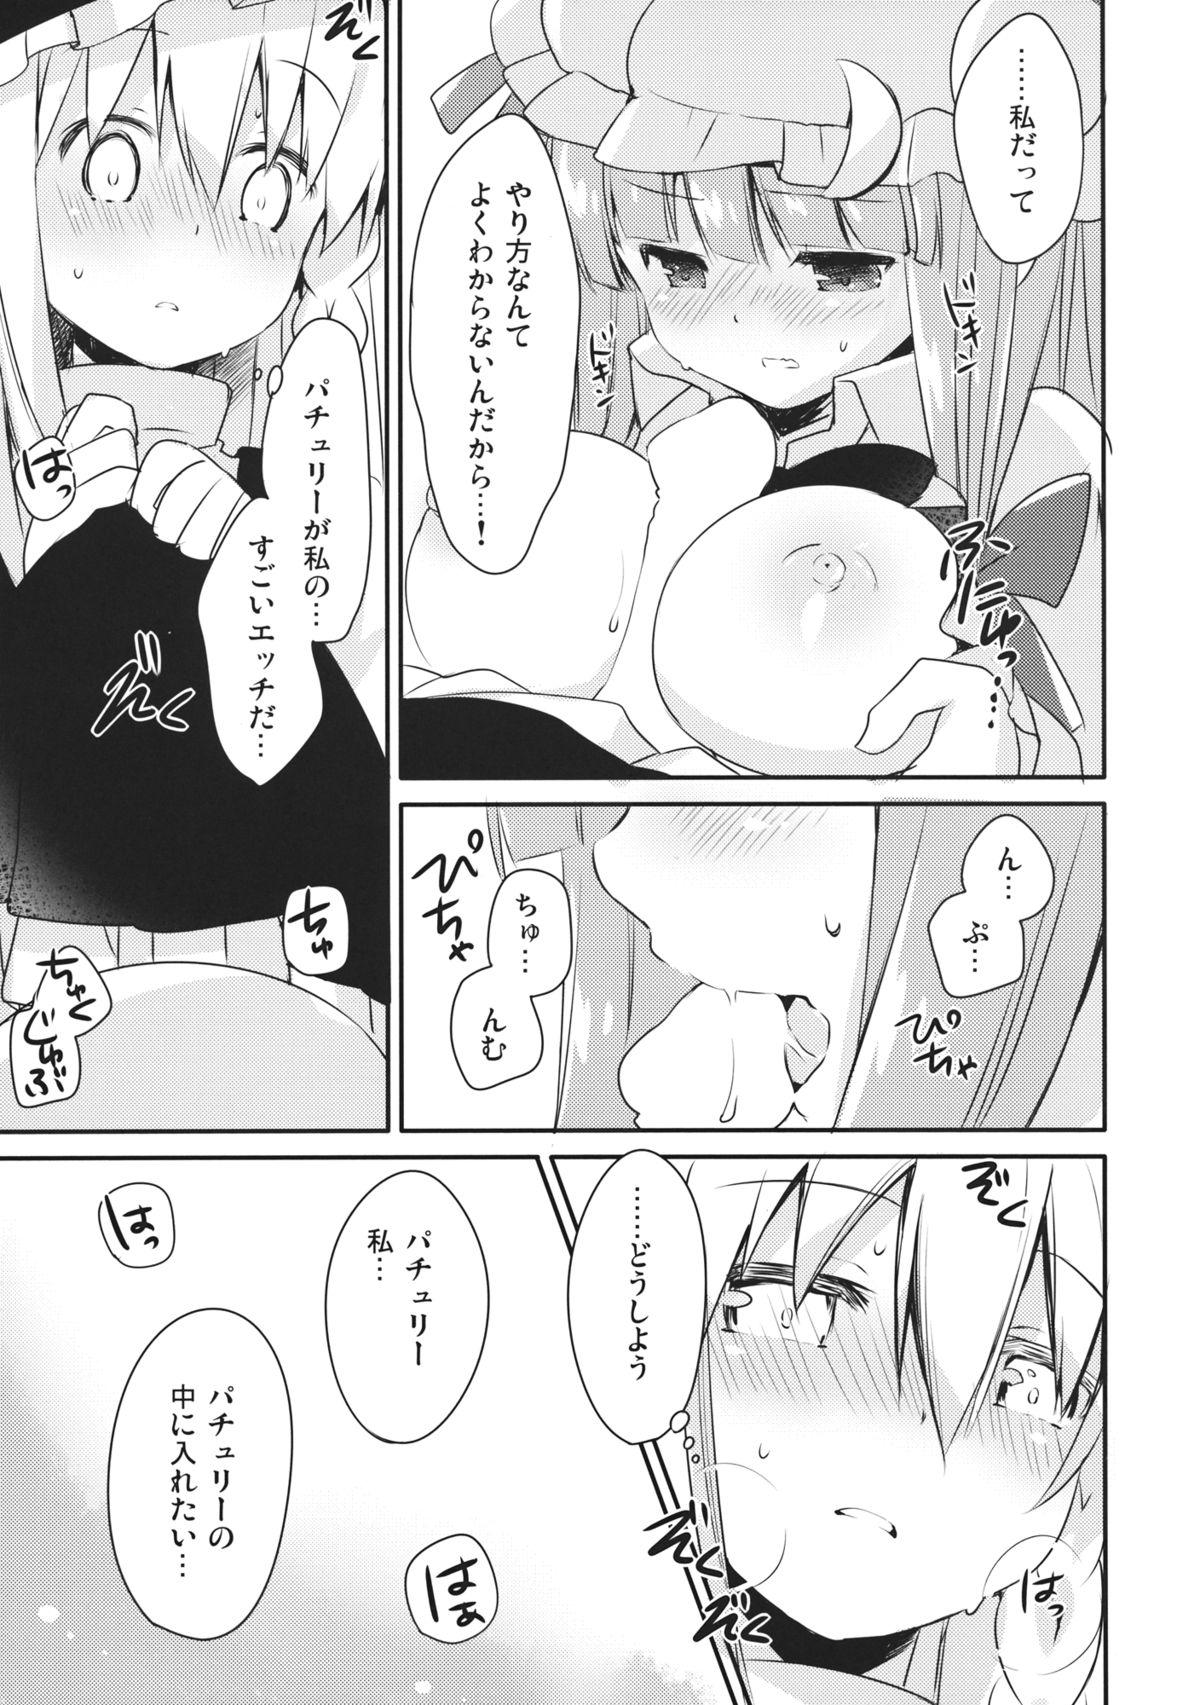 Analfucking Lovely - Touhou project Livecams - Page 12